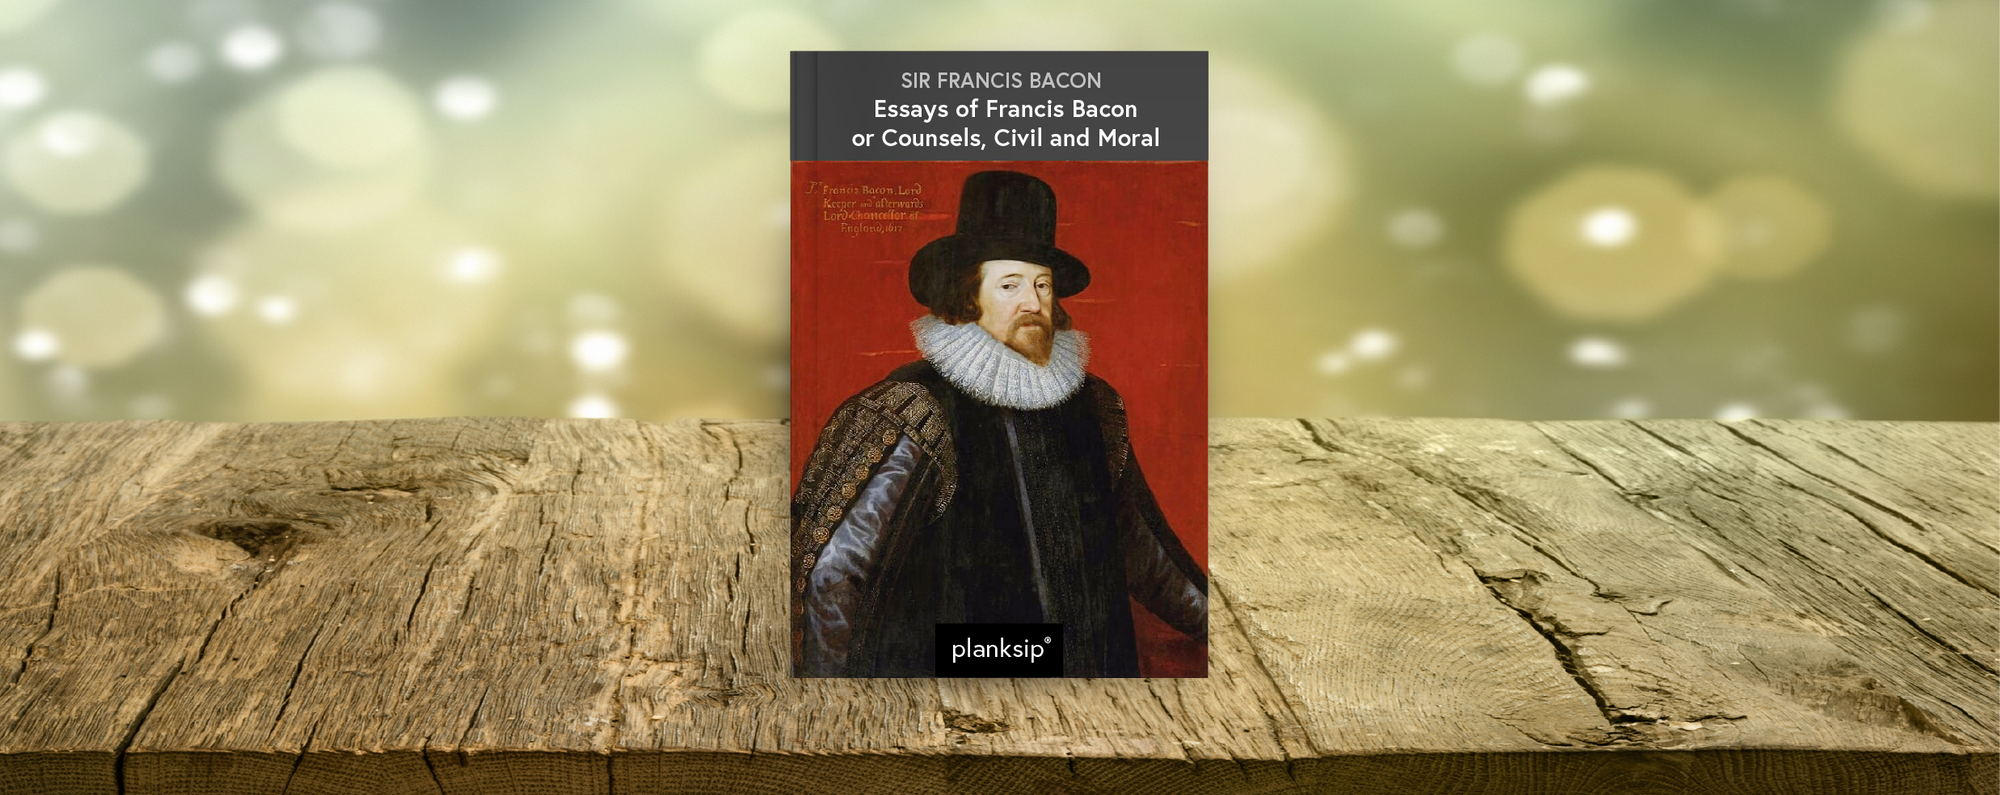 Of Marriage and Single Life by Francis Bacon